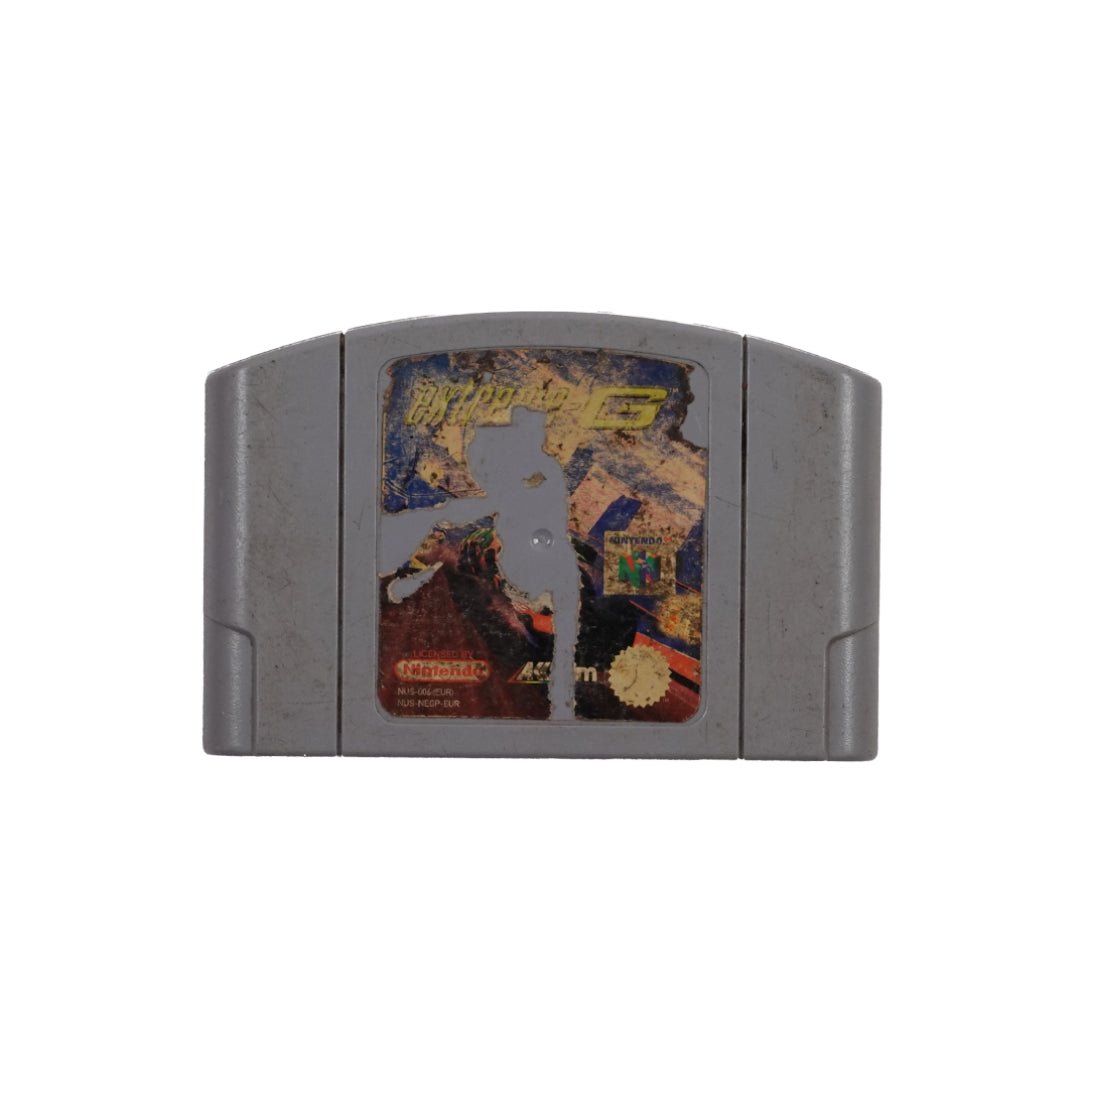 (Pre-Owned) Extreme G - Nintendo 64 - Store 974 | ستور ٩٧٤